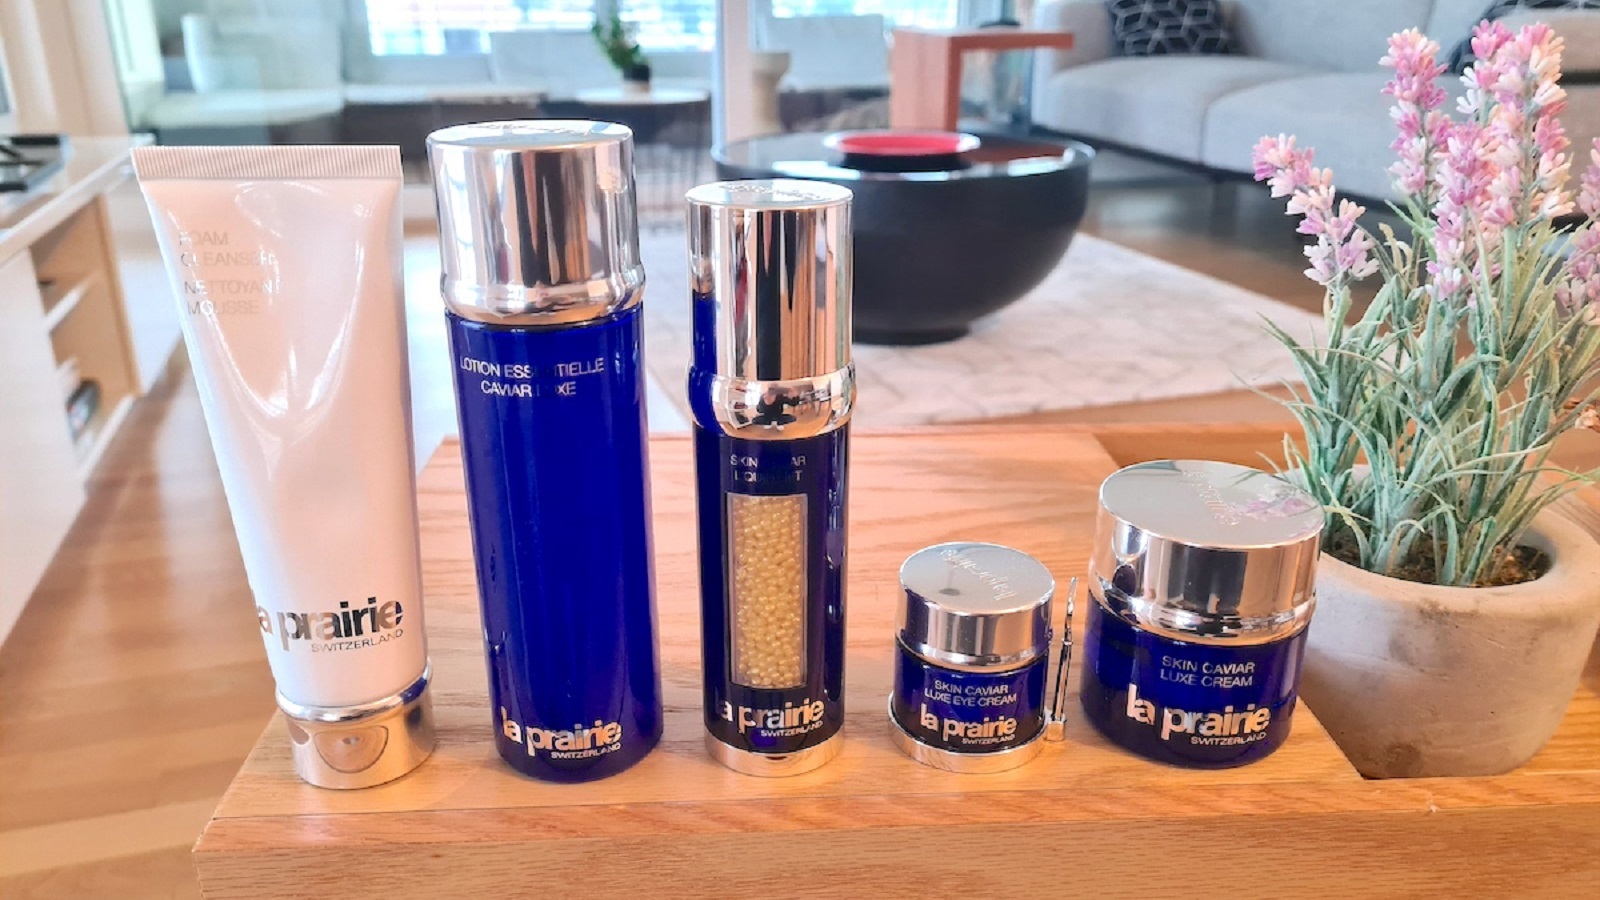 La Prairie Skincare Review: Is This Luxury Brand Really Worth the Hype?